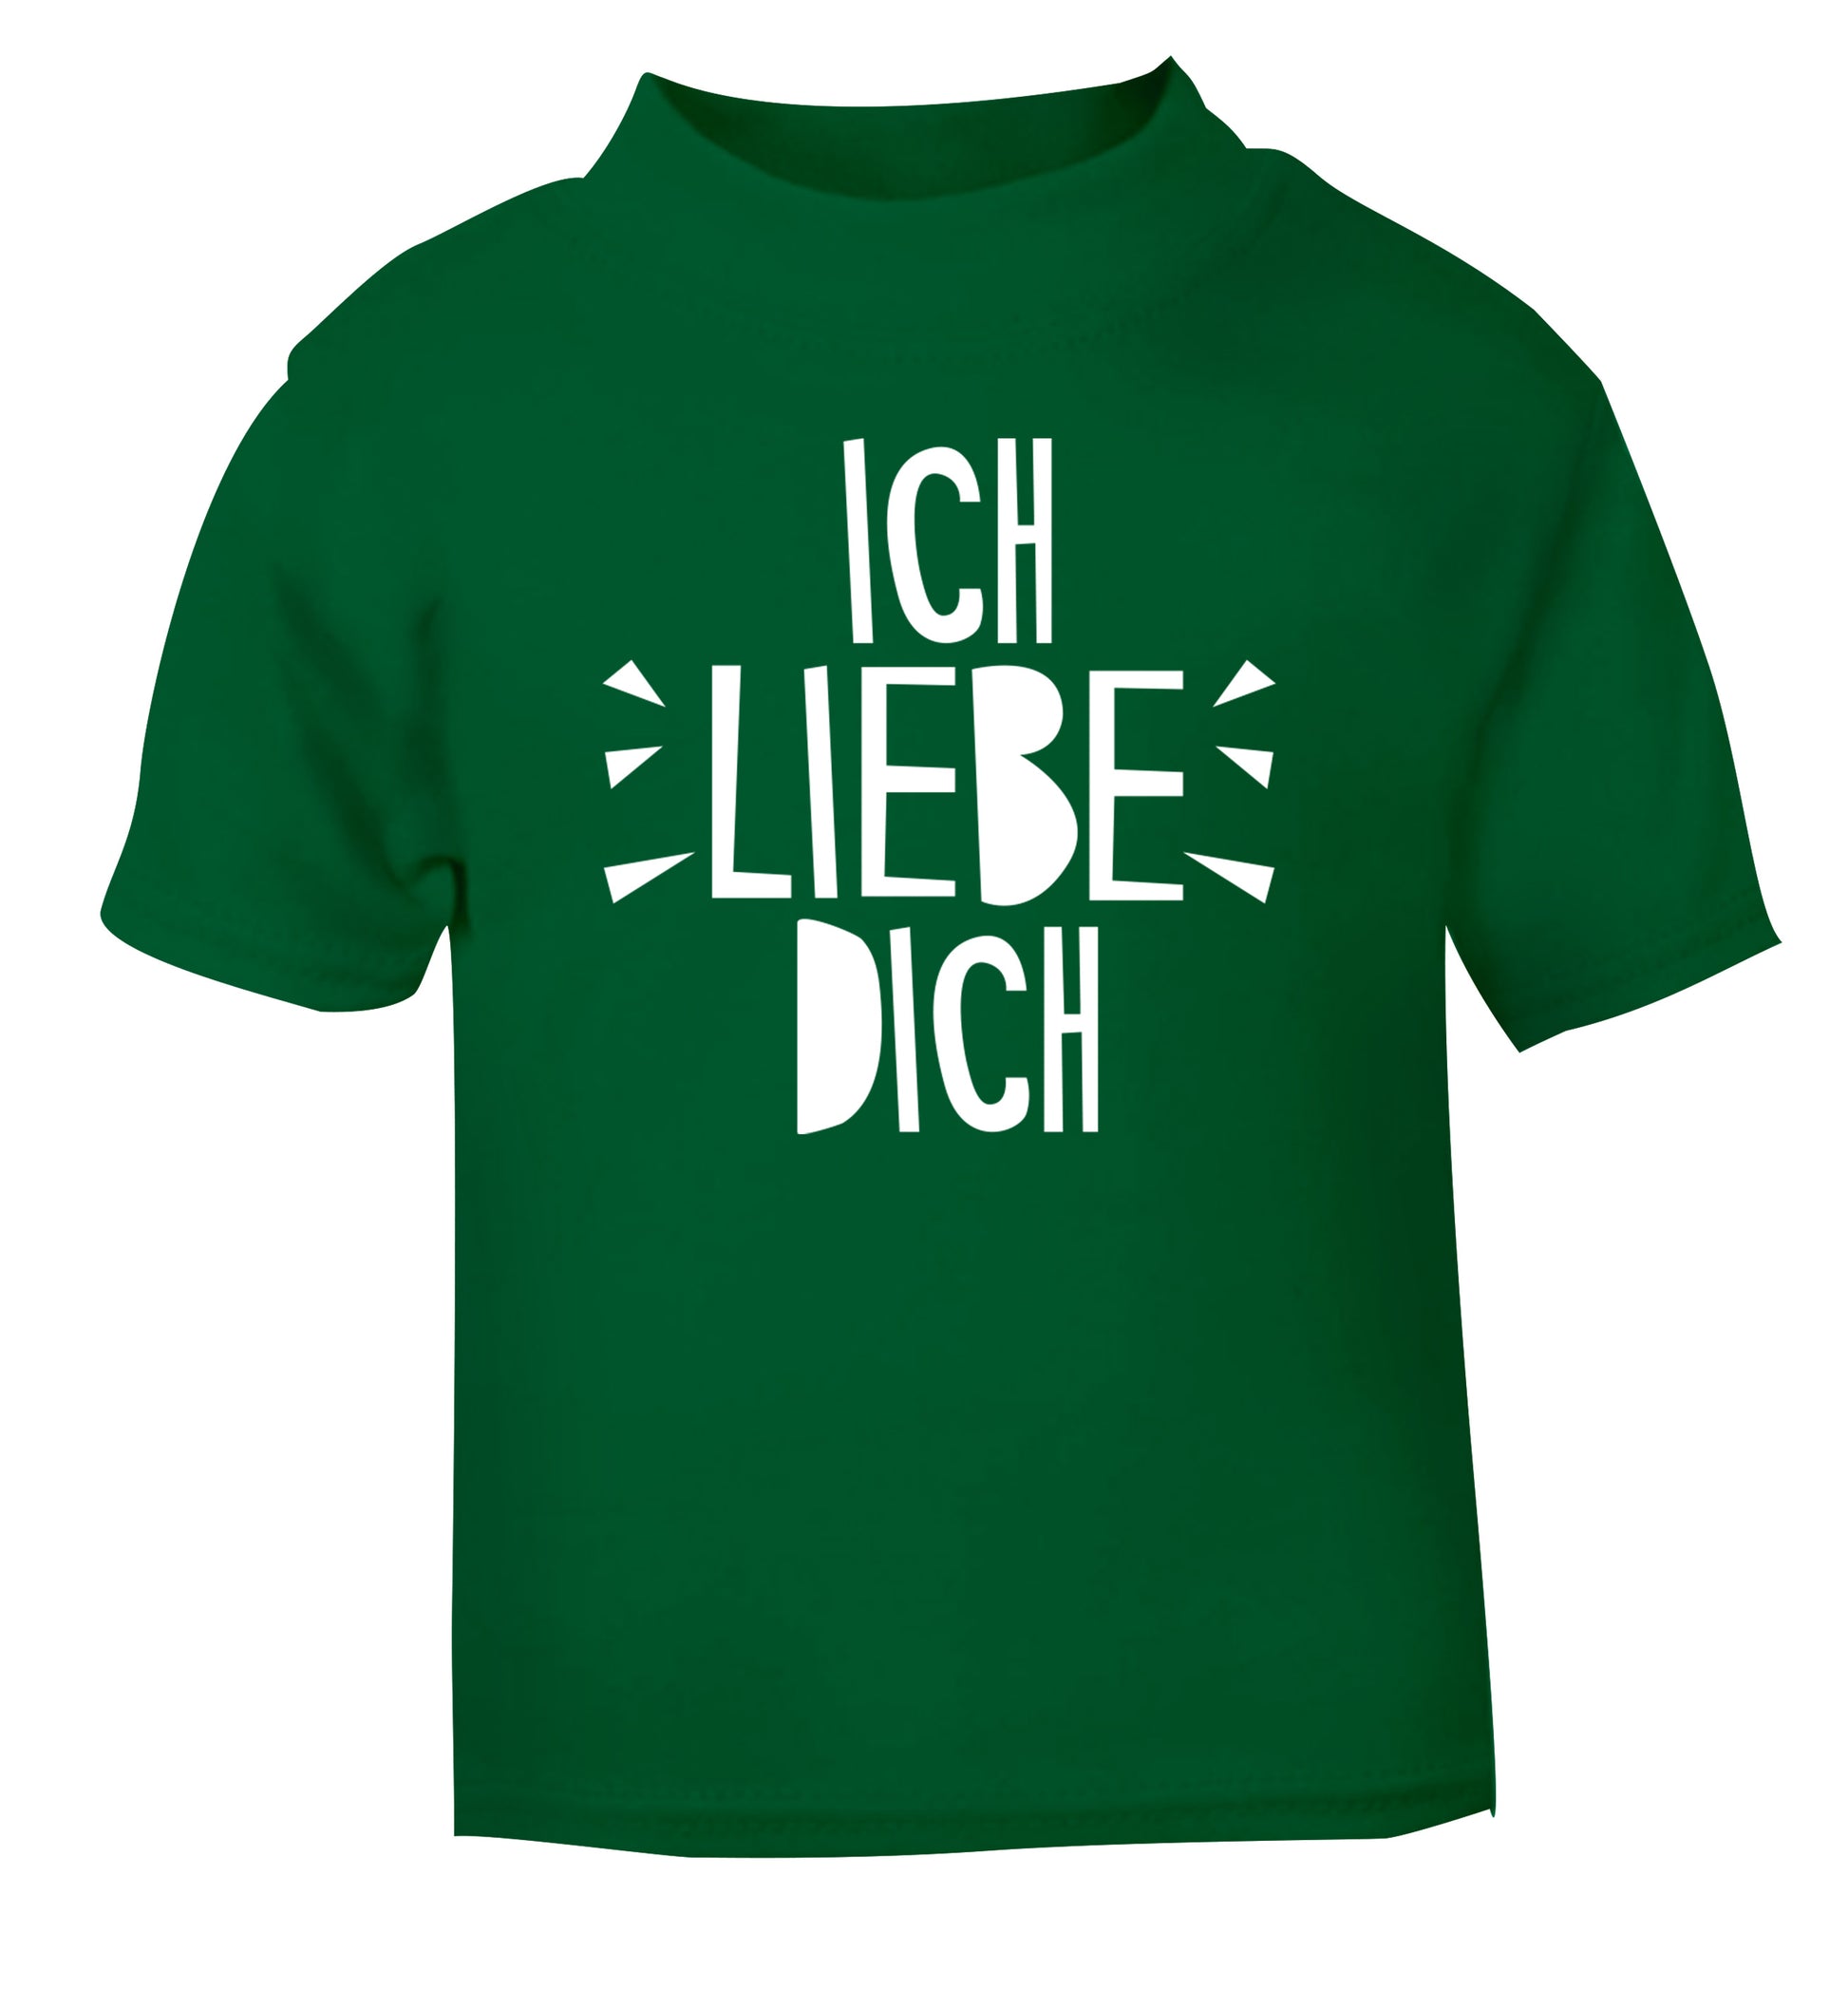 Ich liebe dich - I love you green Baby Toddler Tshirt 2 Years